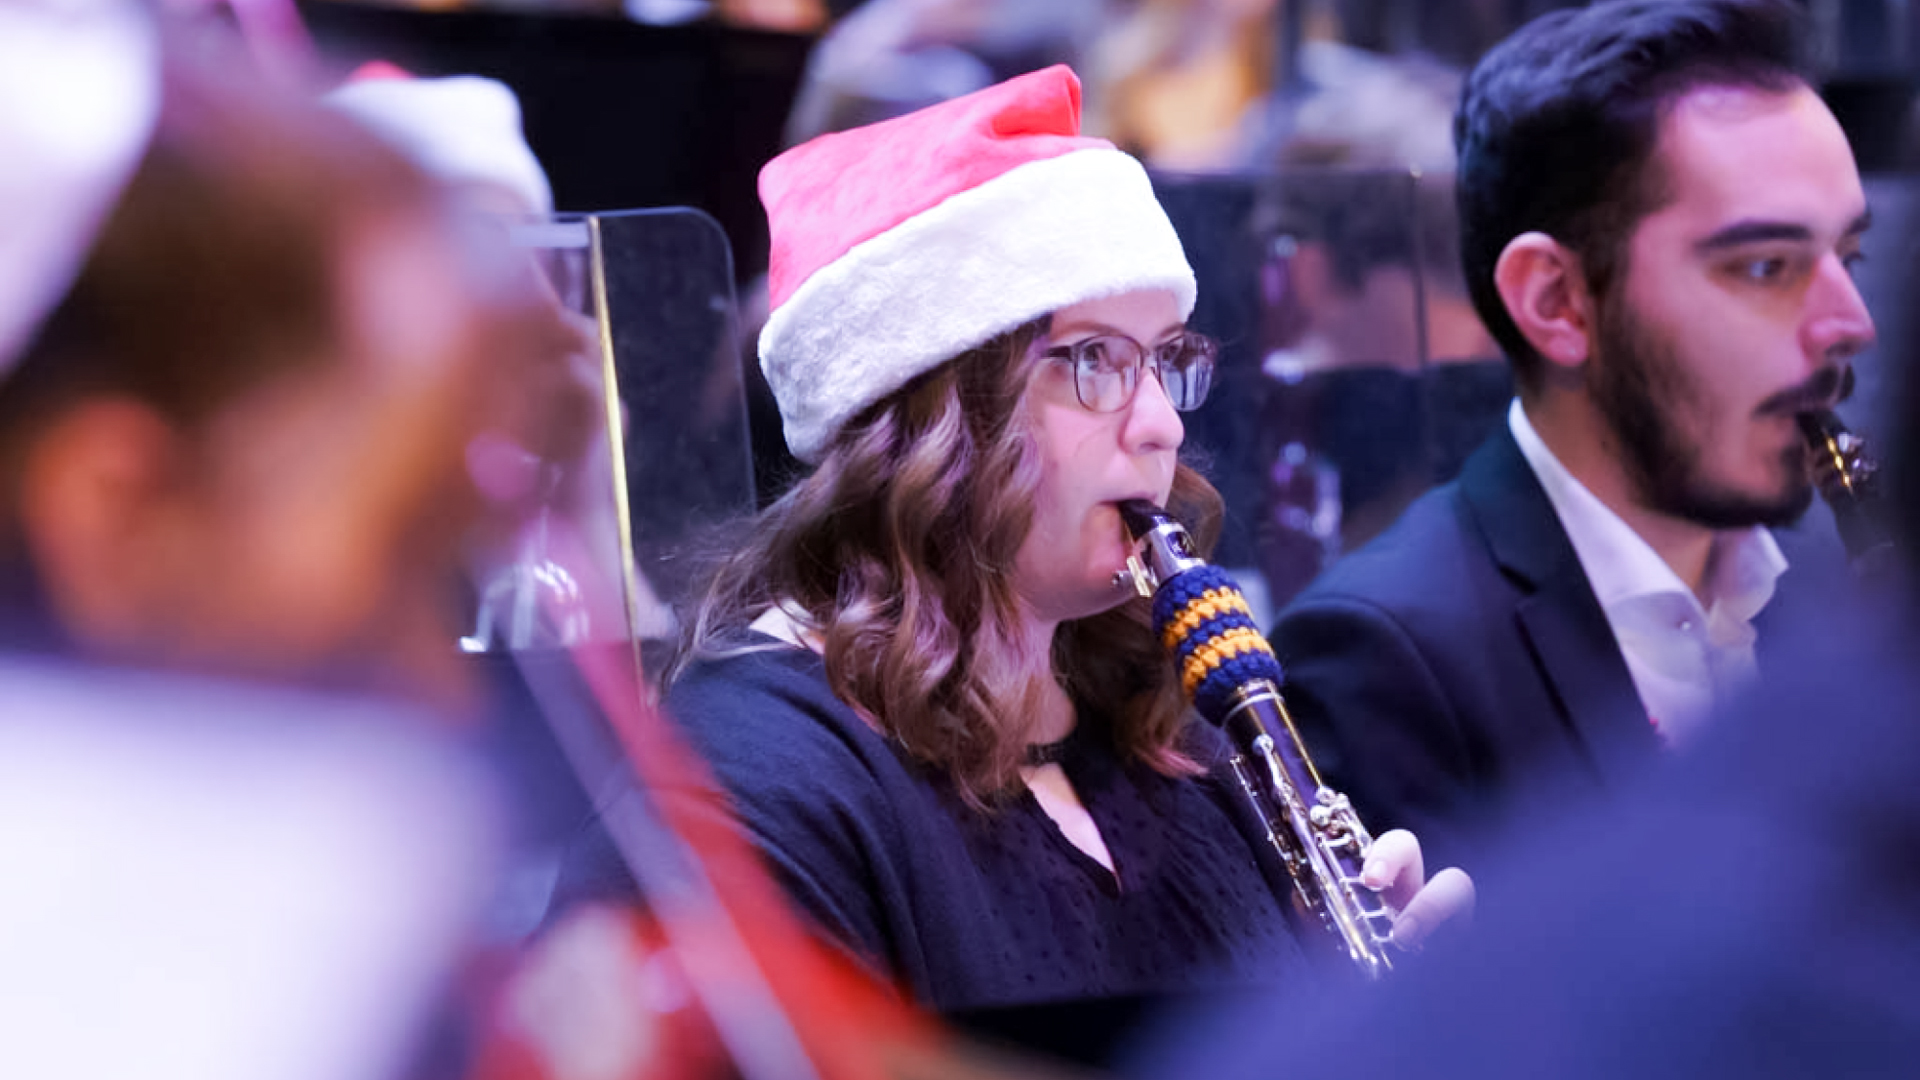 A young woman playing the clarinet in an orchestra wears a Santa hat.